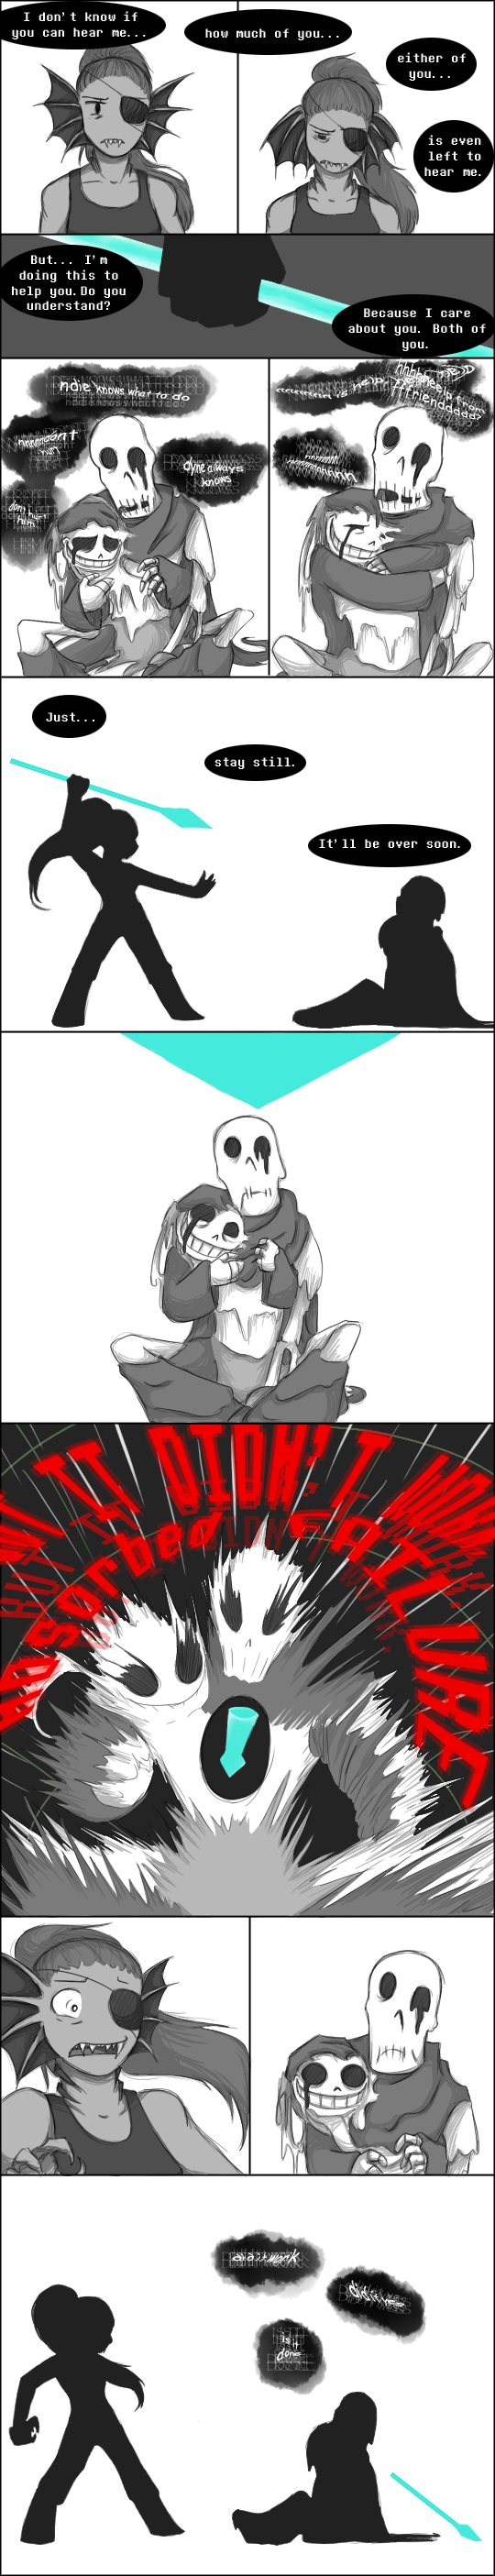 Undertale Spoilers We Will Live Forever By Zarla